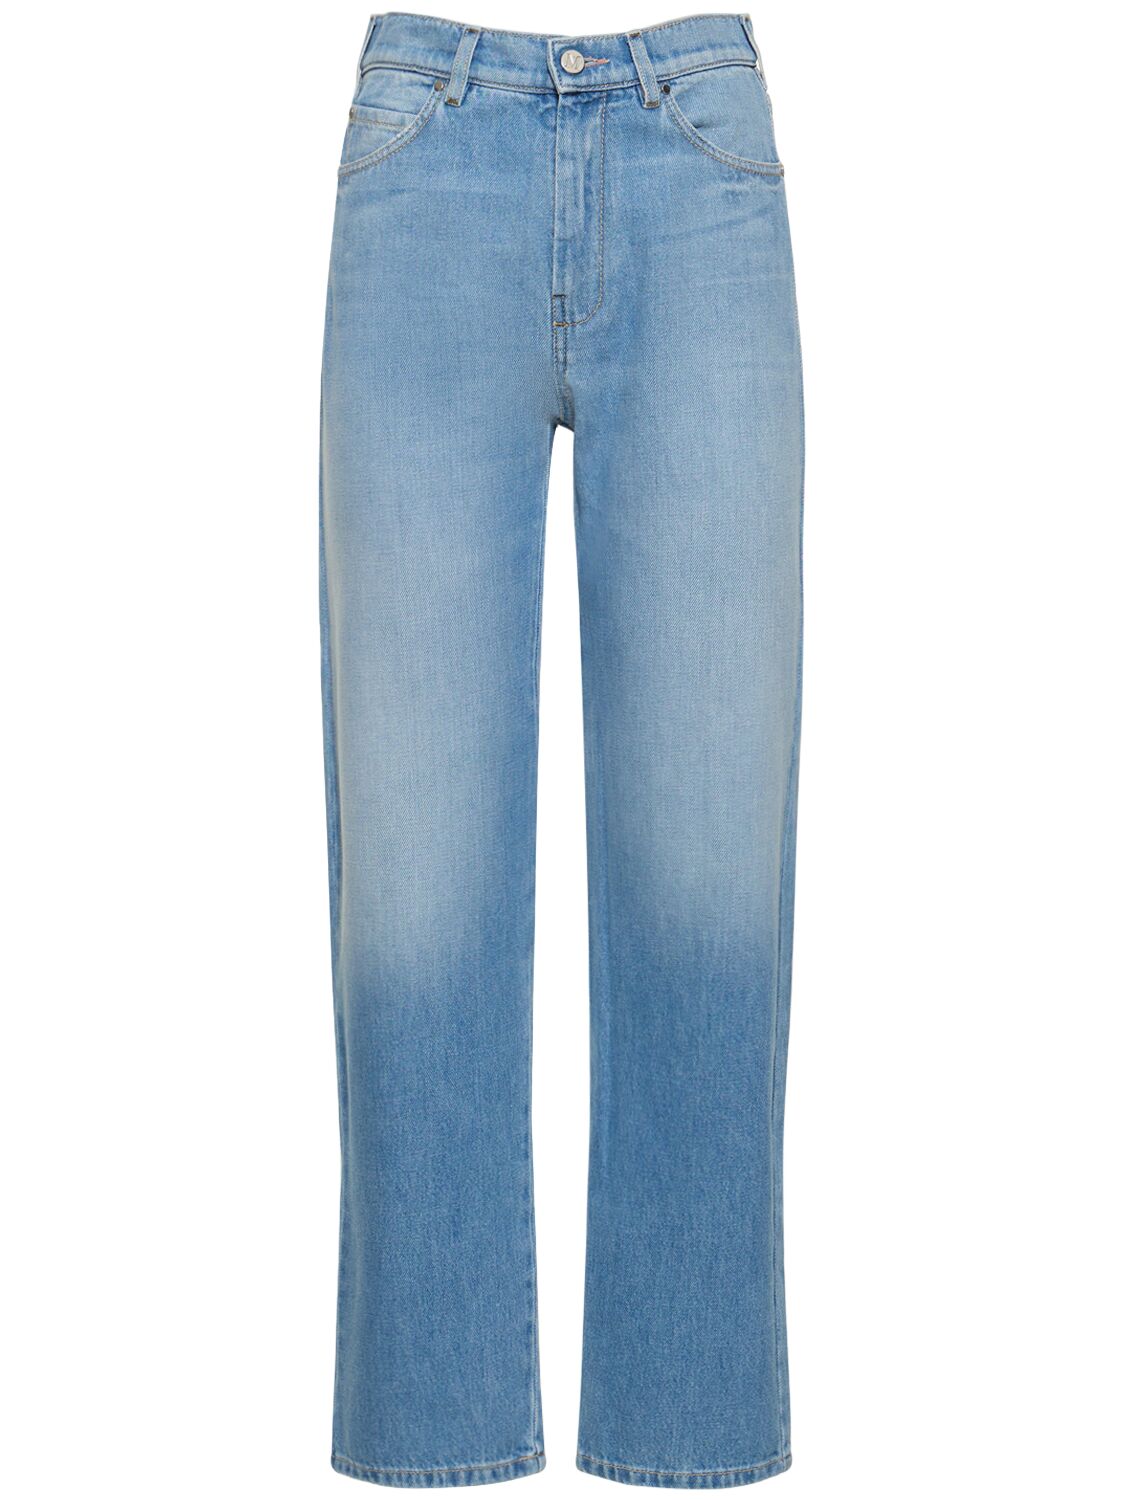 Image of Eccelso Mid Waist Straight Denim Jeans